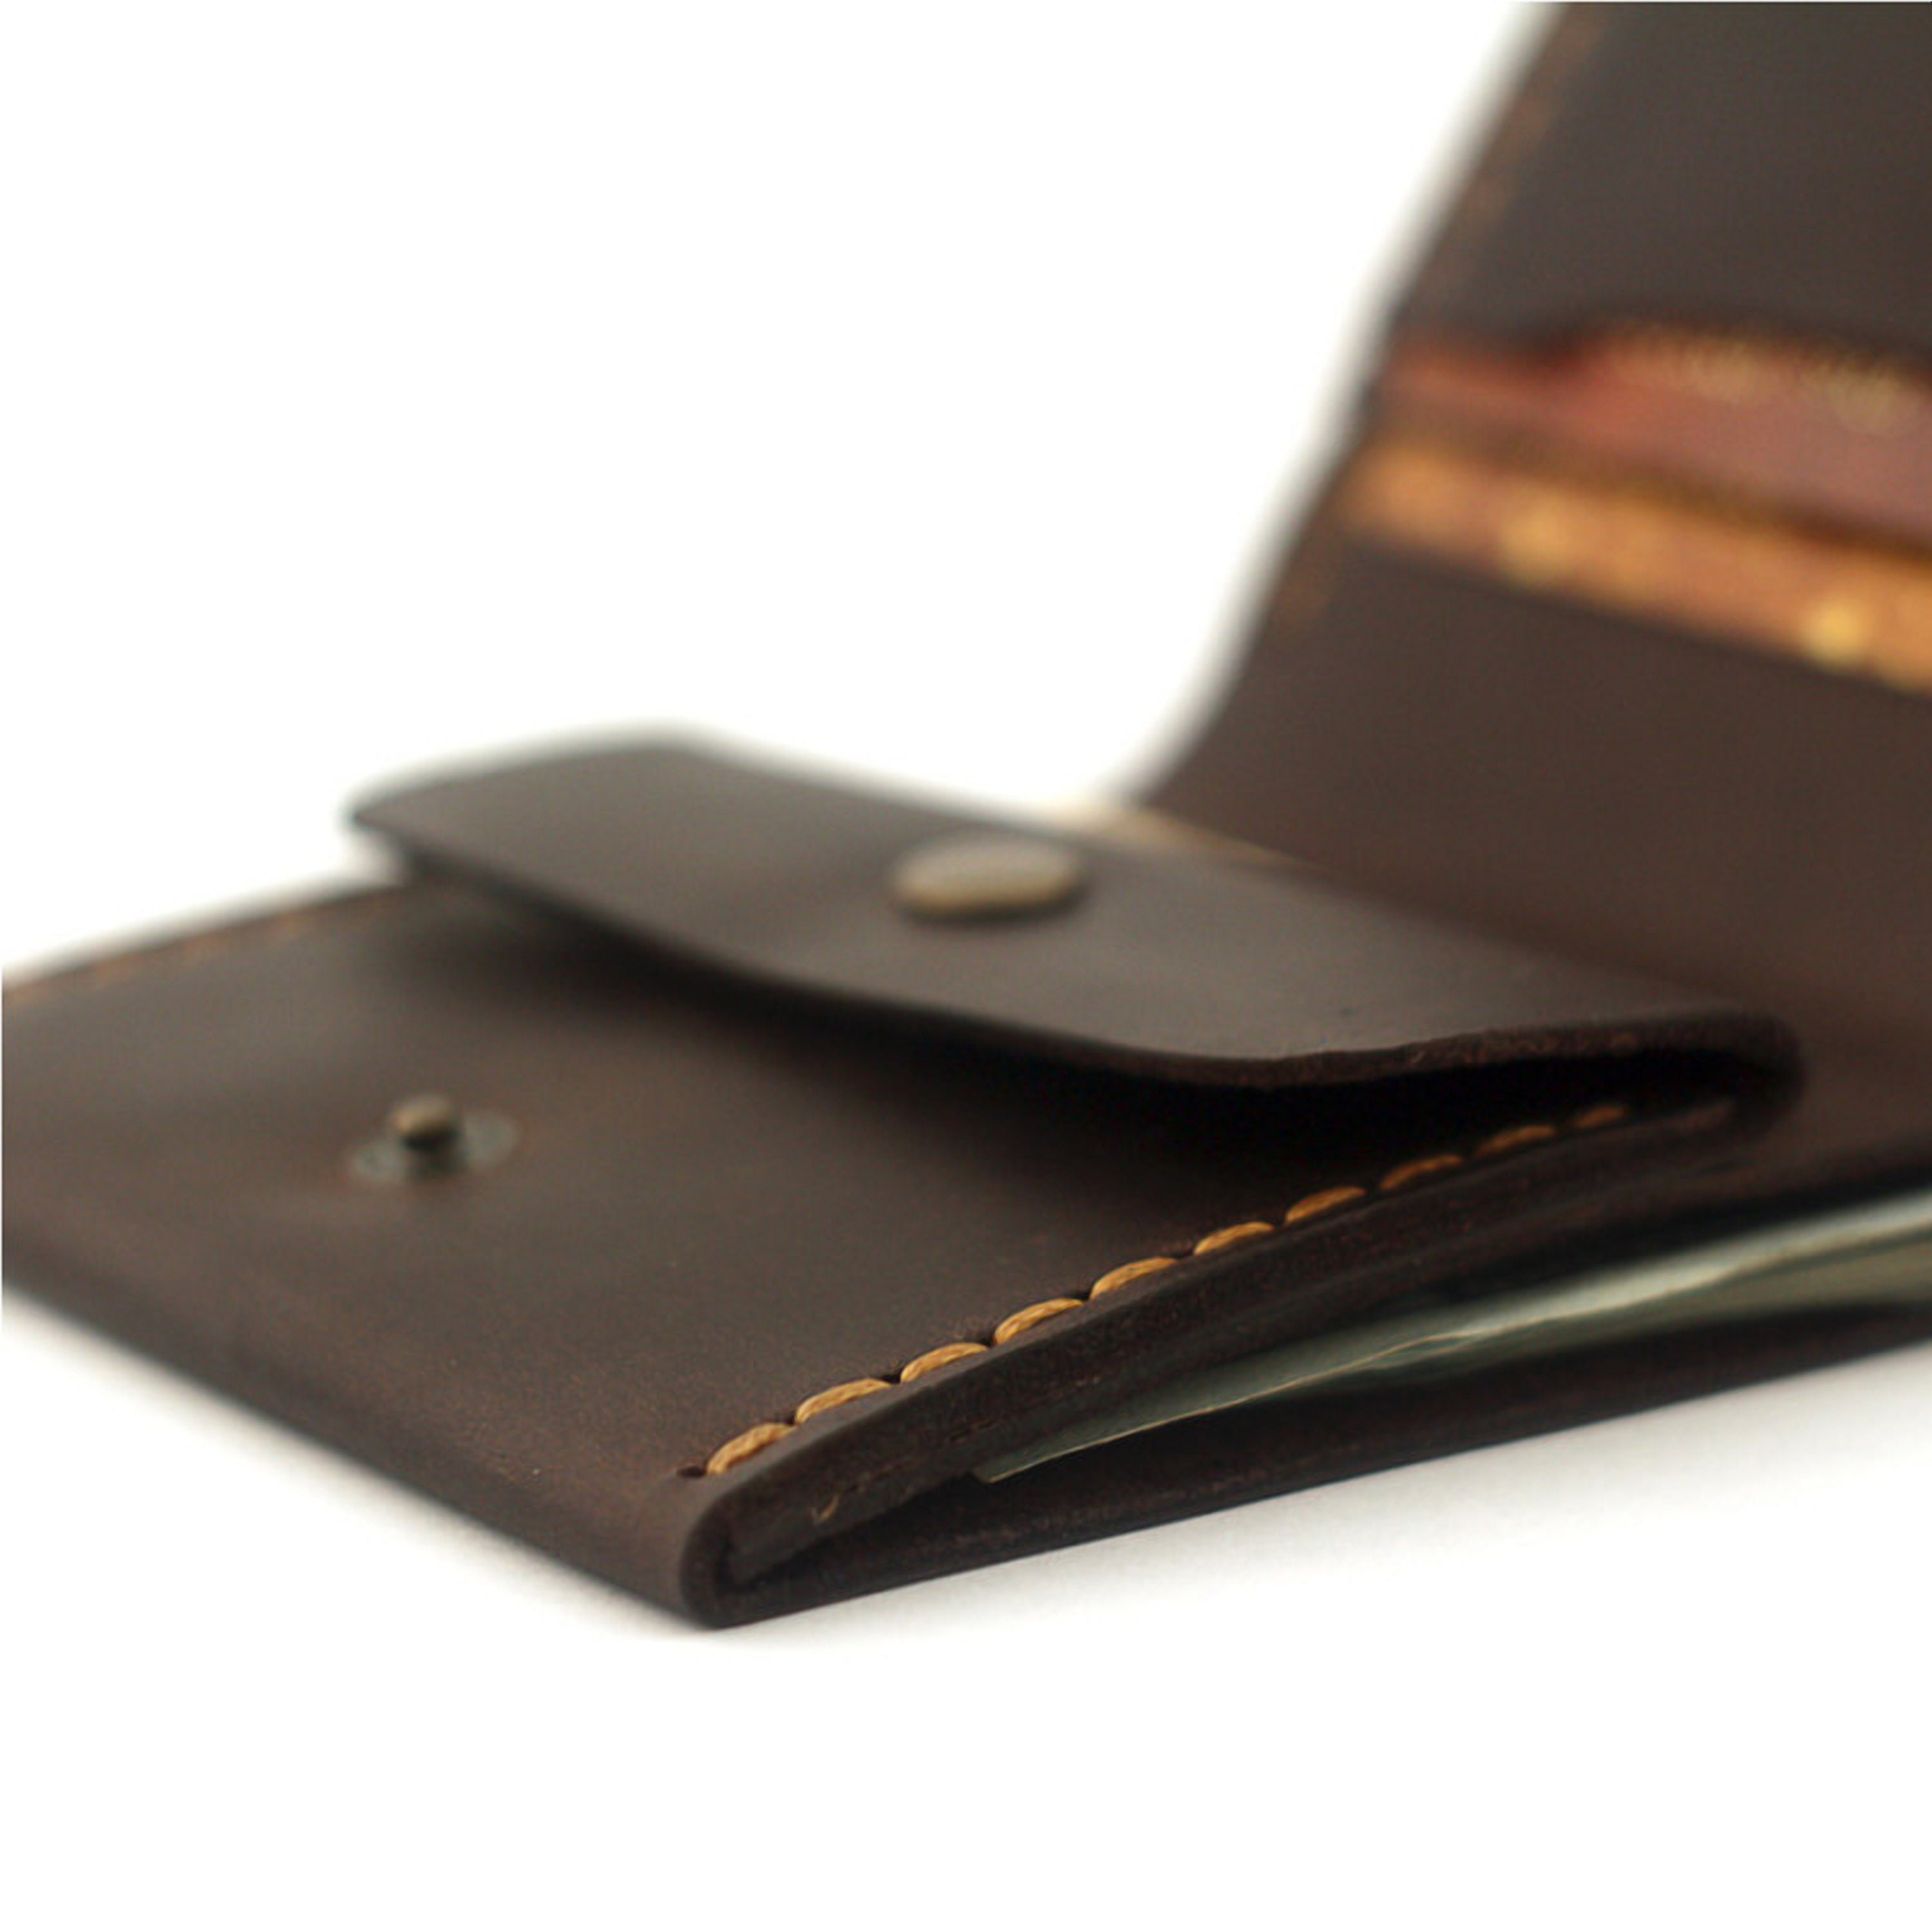 Brown leather handmade wallet with money clip by Luniko. Vintage Series